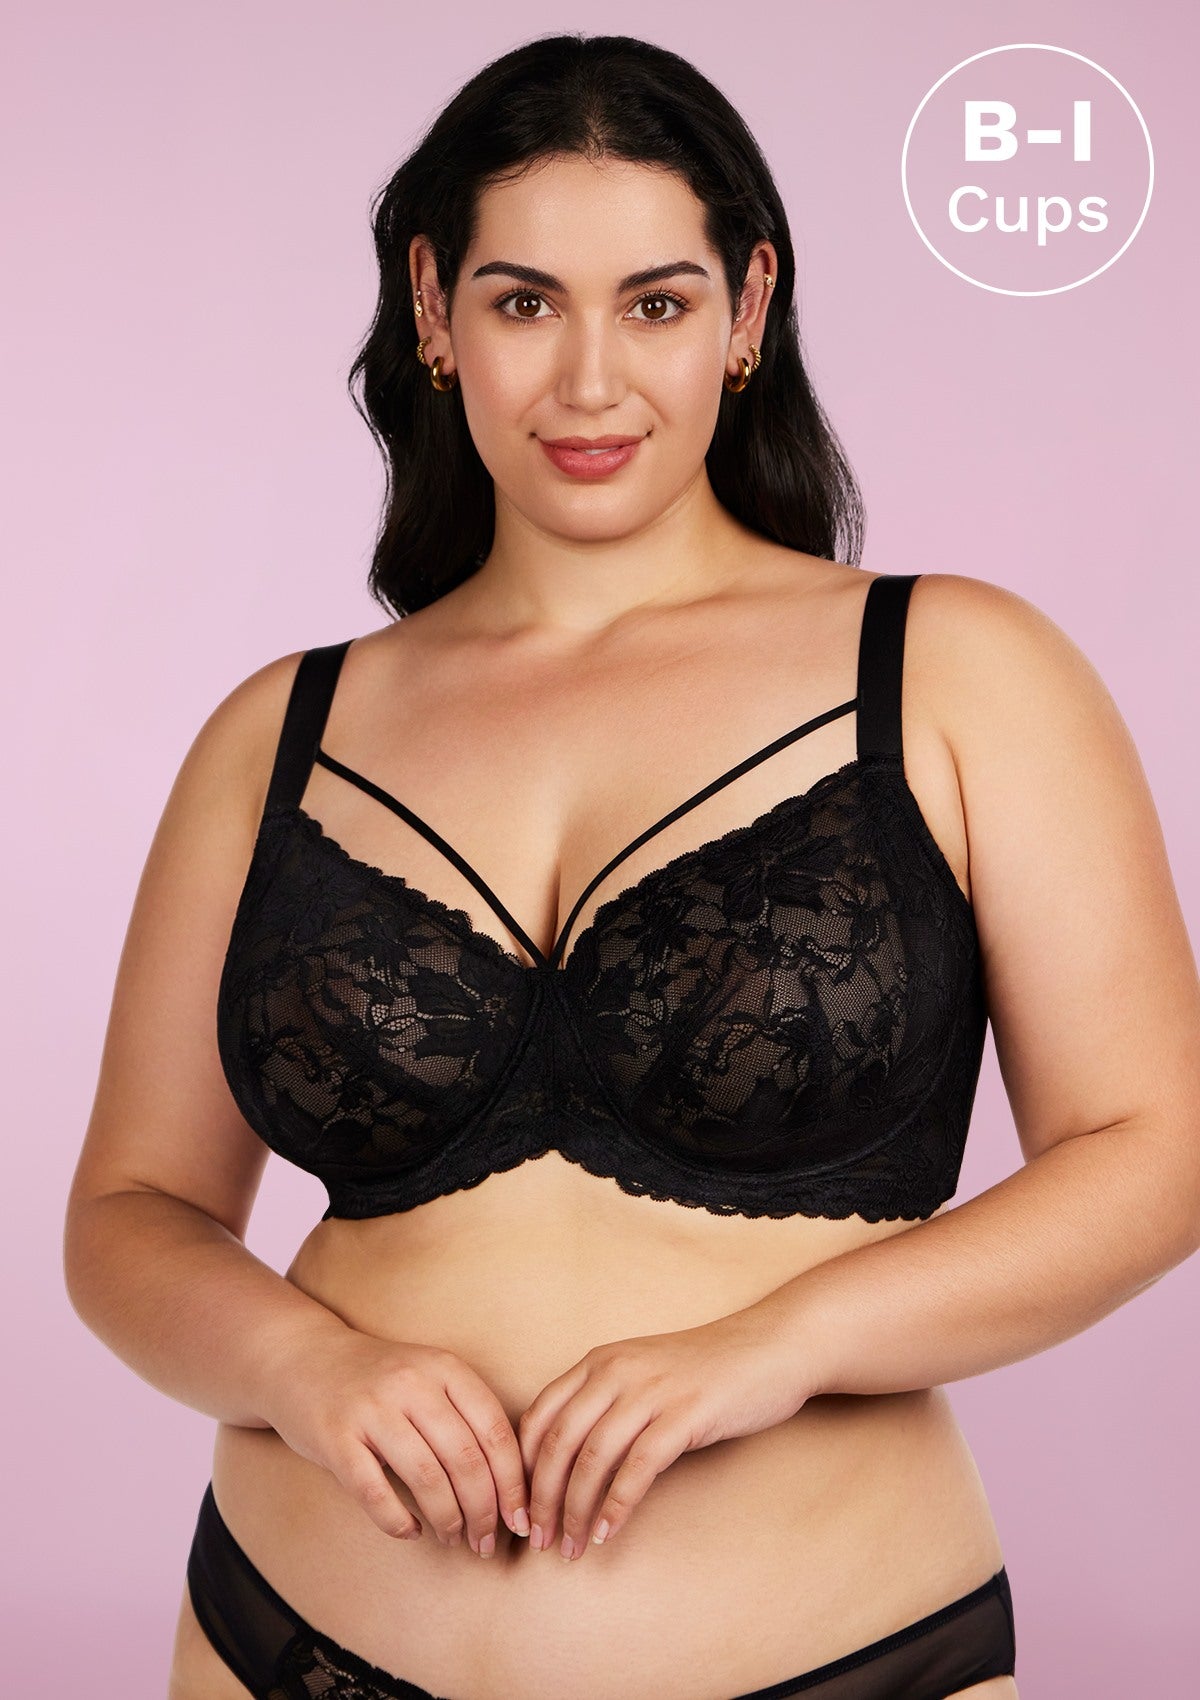 HSIA Pretty In Petals Lace Bra And Panty Set: Non Padded Wired Bra - Black / 36 / H